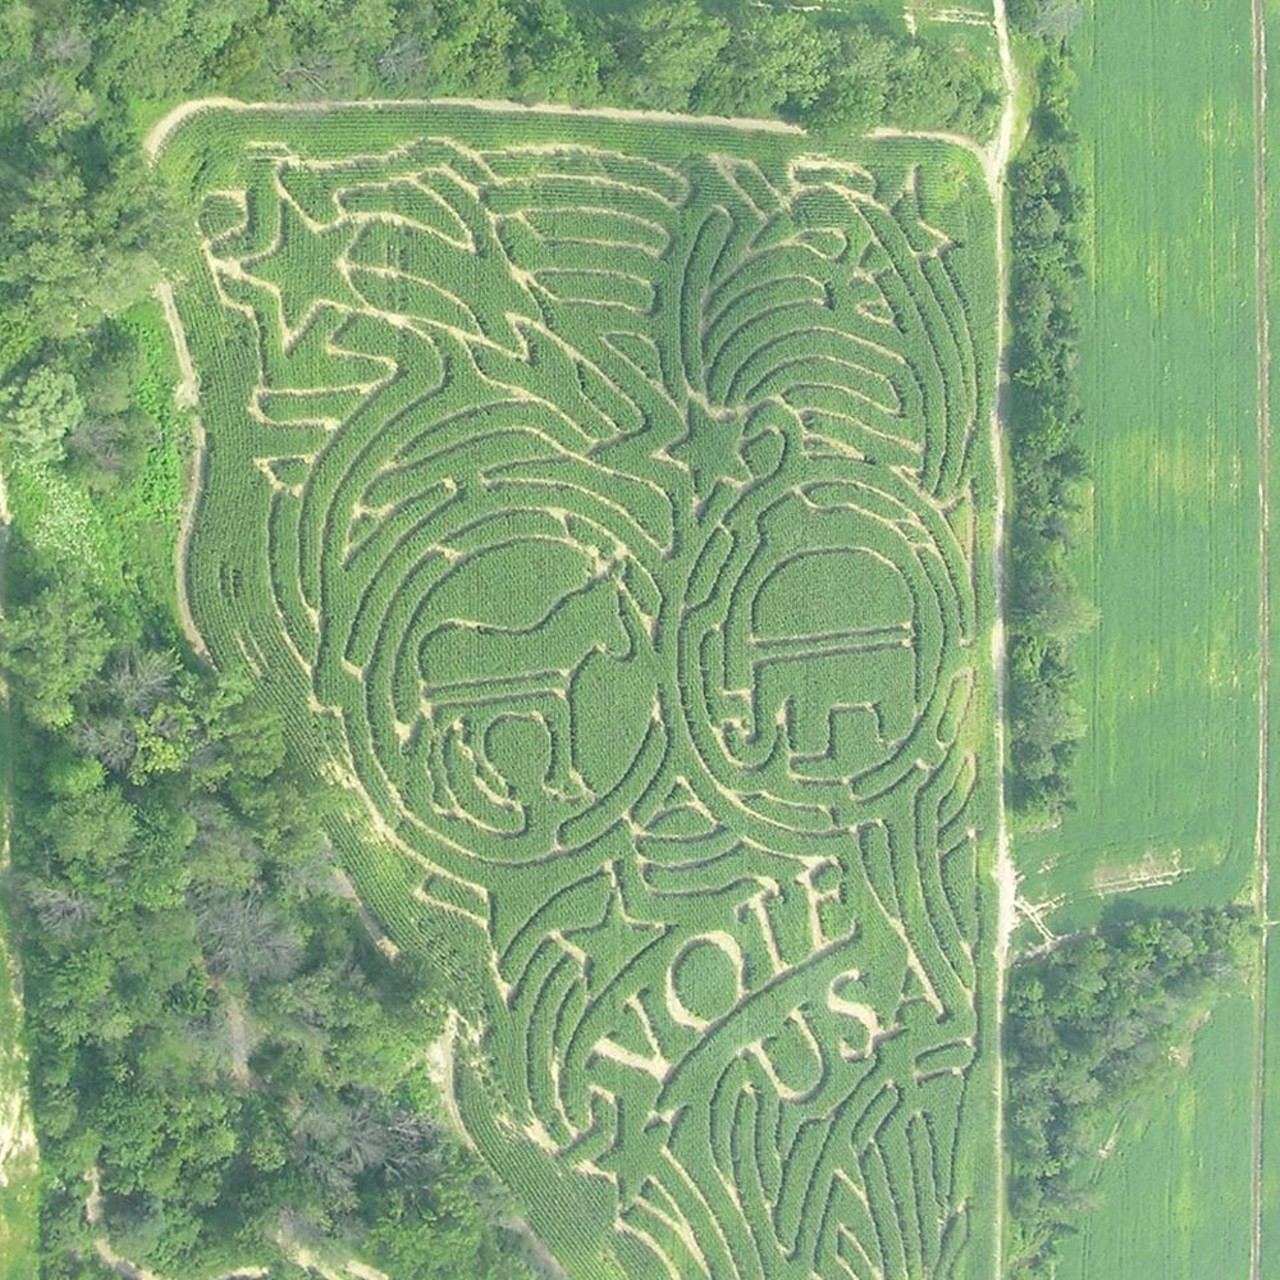 Cornfun Corn Maze 
Cornfun Corn Maze (try saying that 5 times in a row) has one of the coolest corn maze design we&#146;re seen all year. It is celebrating this year&#146;s election with a &#147;VOTE USA&#148; message designed in the corn. This place also has hayrides, a pumpkin patch, and a petting zoo. 
9391 Lindsey Rd., Casco, MI
586-365-9401
Open till 10 p.m. on the weekends.